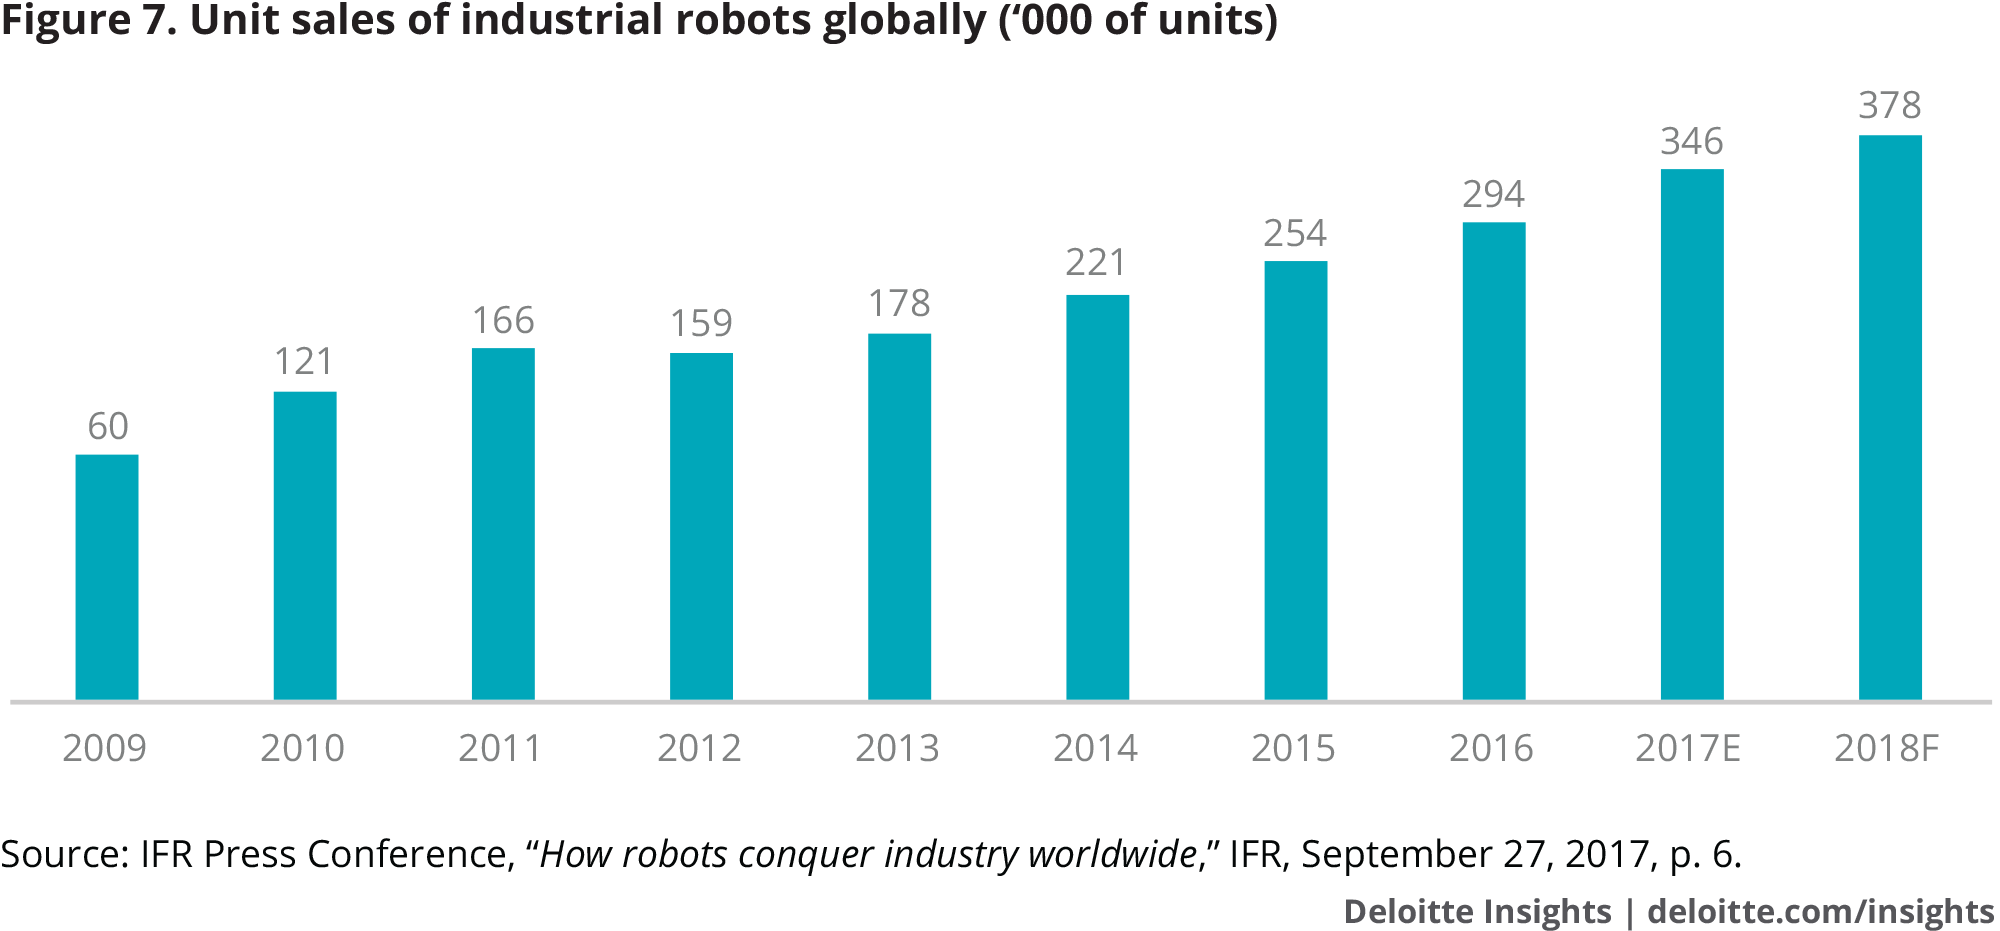 Unit sales of industrial robots globally (‘000 of units)